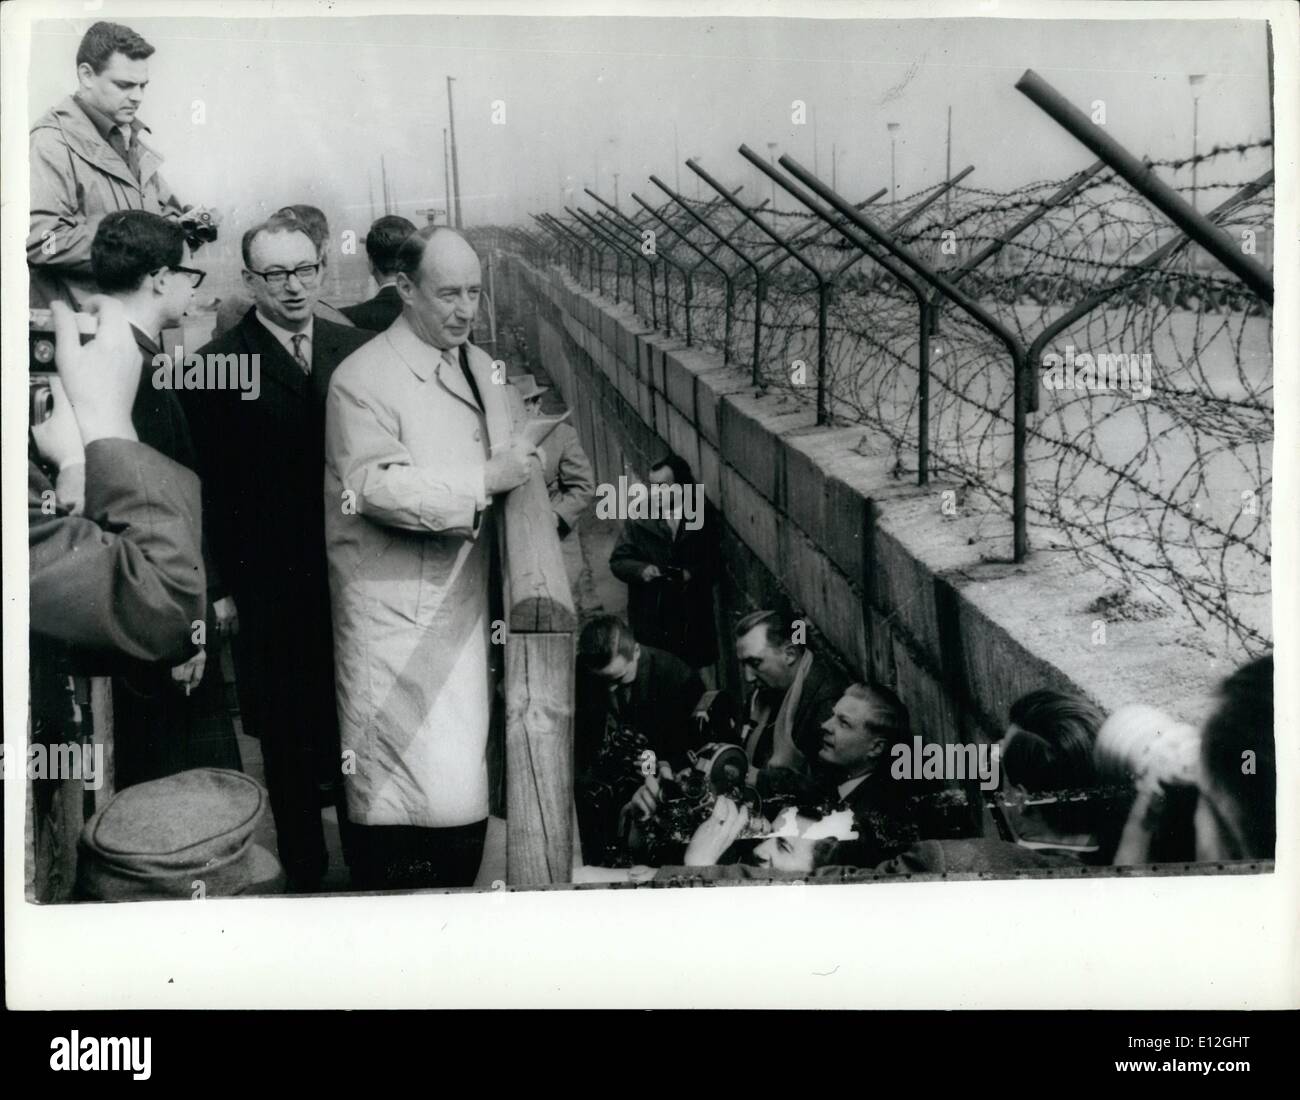 Dec. 26, 2011 - Adlai Stevenson In Berlin: Mr. Adlai Stevenson, the Chief U.S. delegate to the United Nations is on a visit to West Berlin. Photo Shows Mr. Adlai Stevenson looks over the Berlin Wall in the Potsdam Place today. Stock Photo